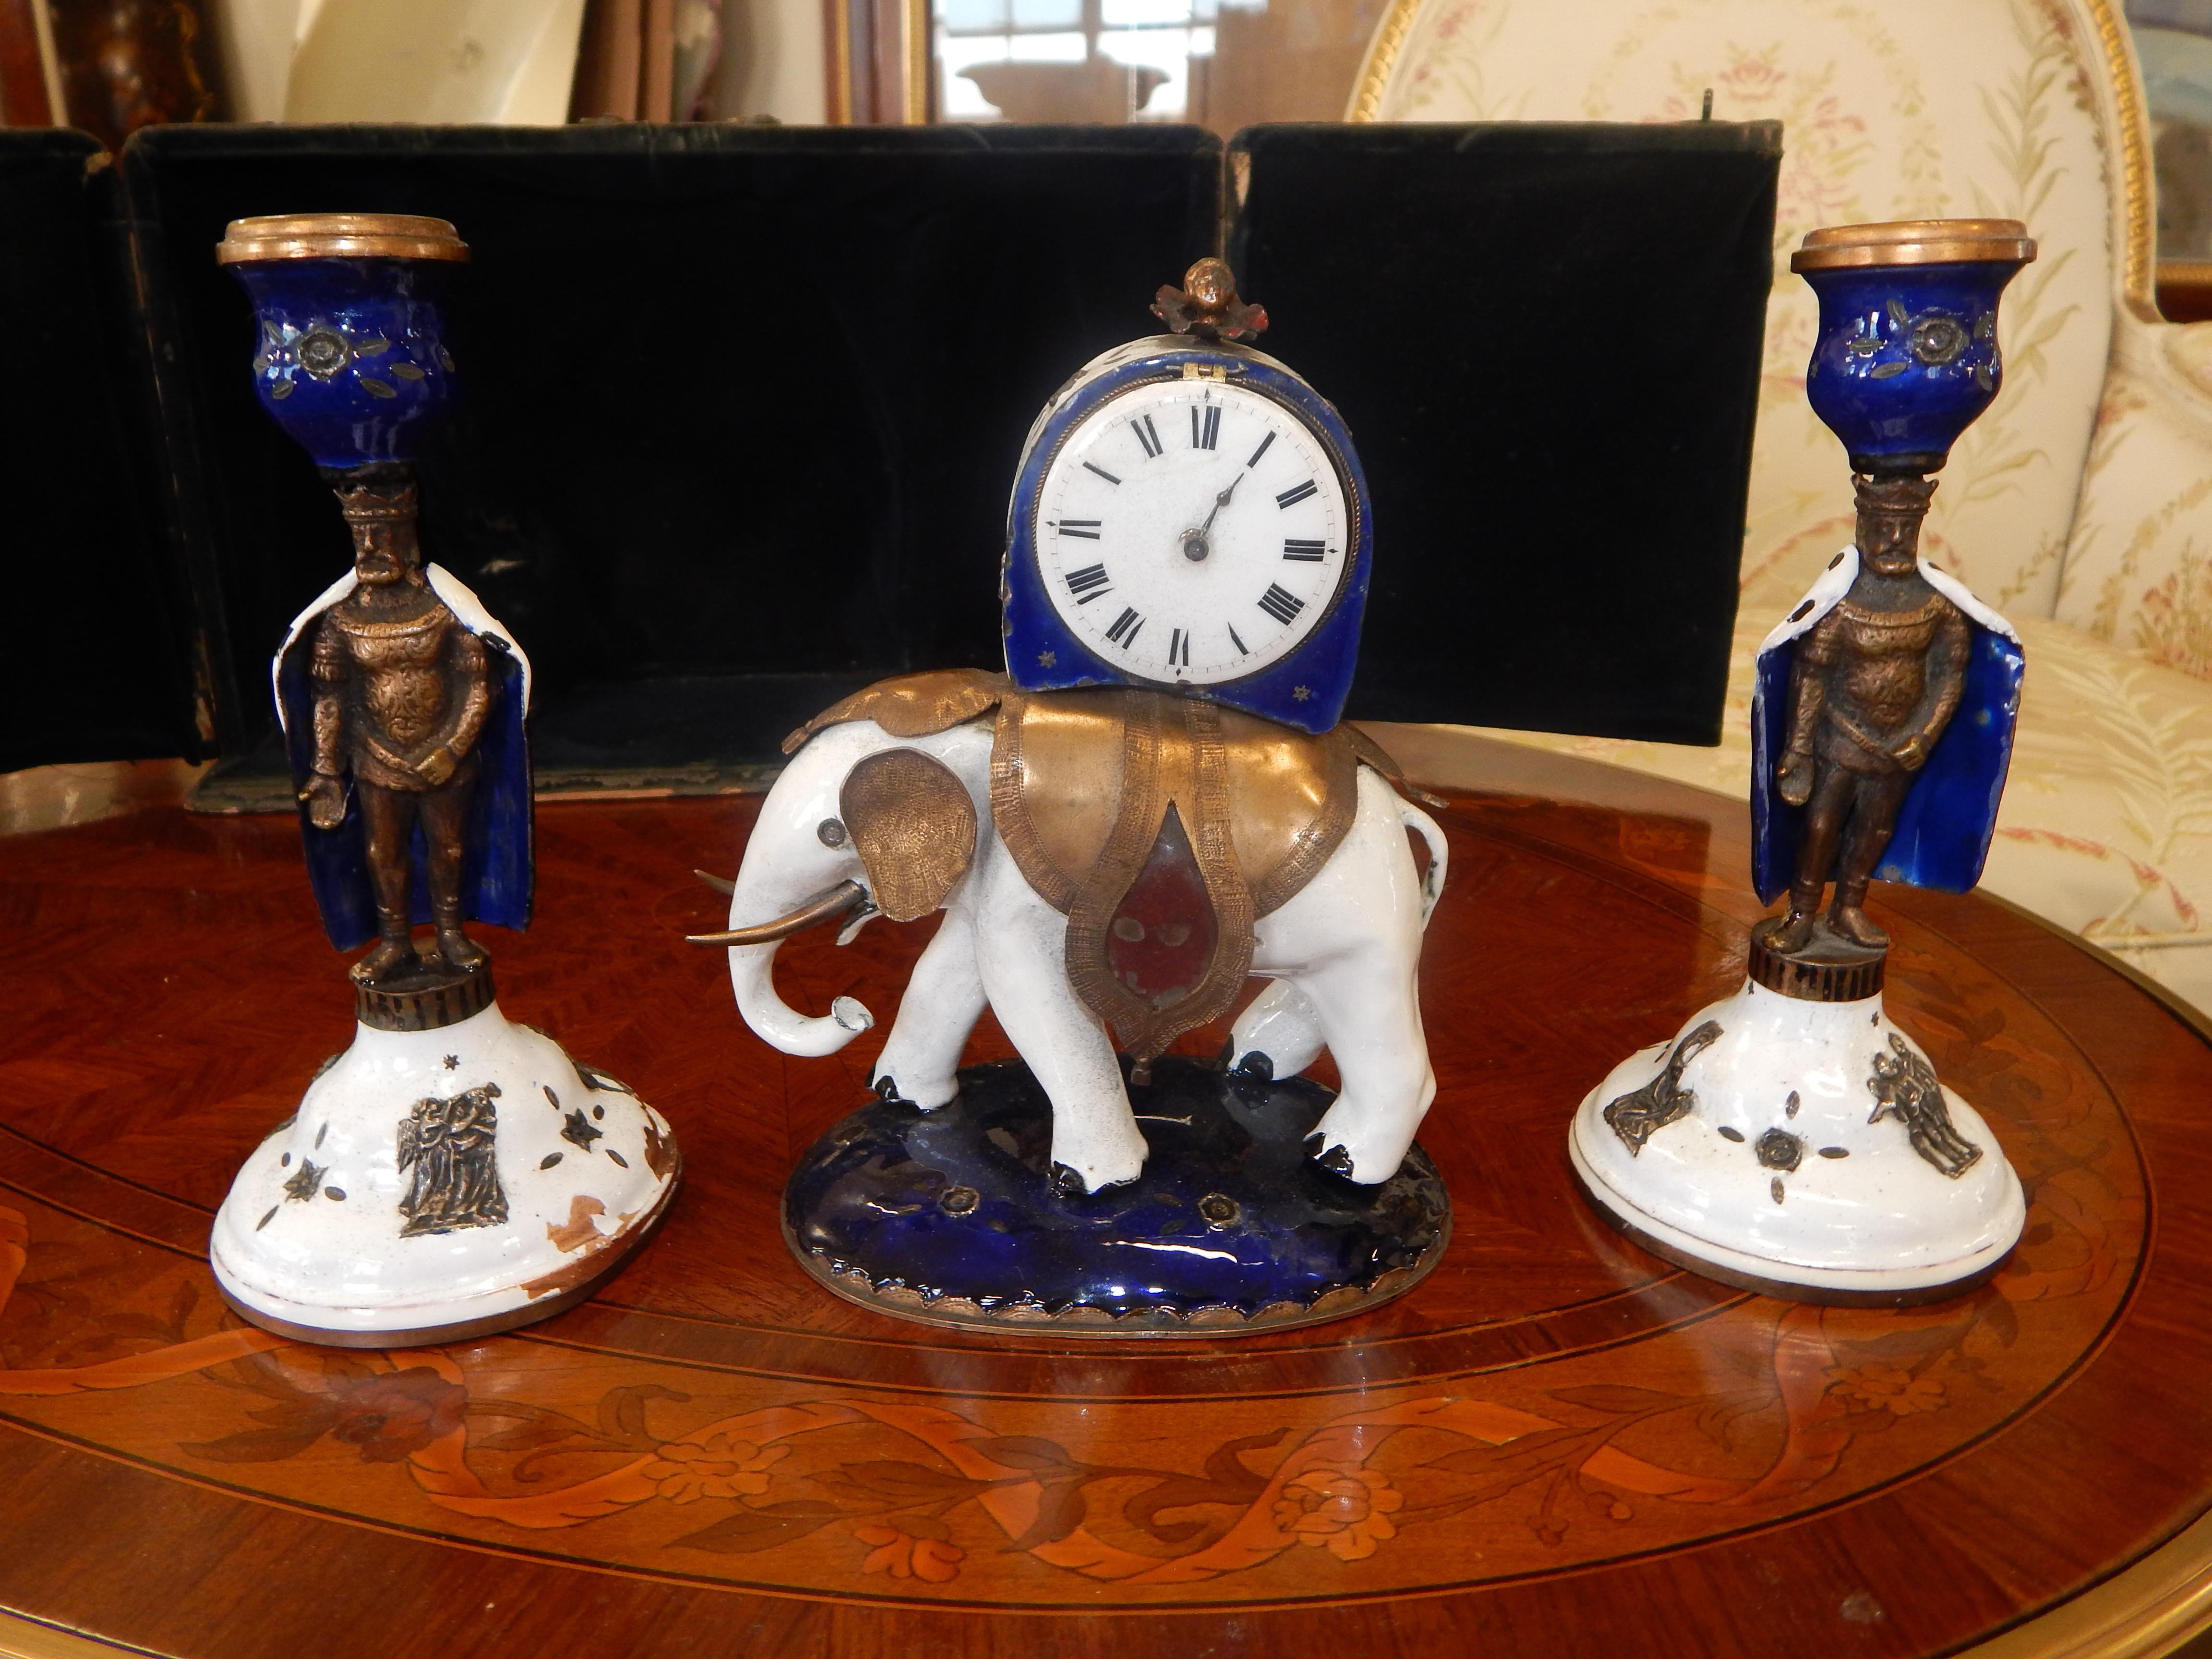 A rare enameled three-piece elephant clock set with figures.

It comes with the original travel case, so this was made for elite clientele.

The clock is in the form of an elephant, with the clock sitting on top.

The candlesticks look like